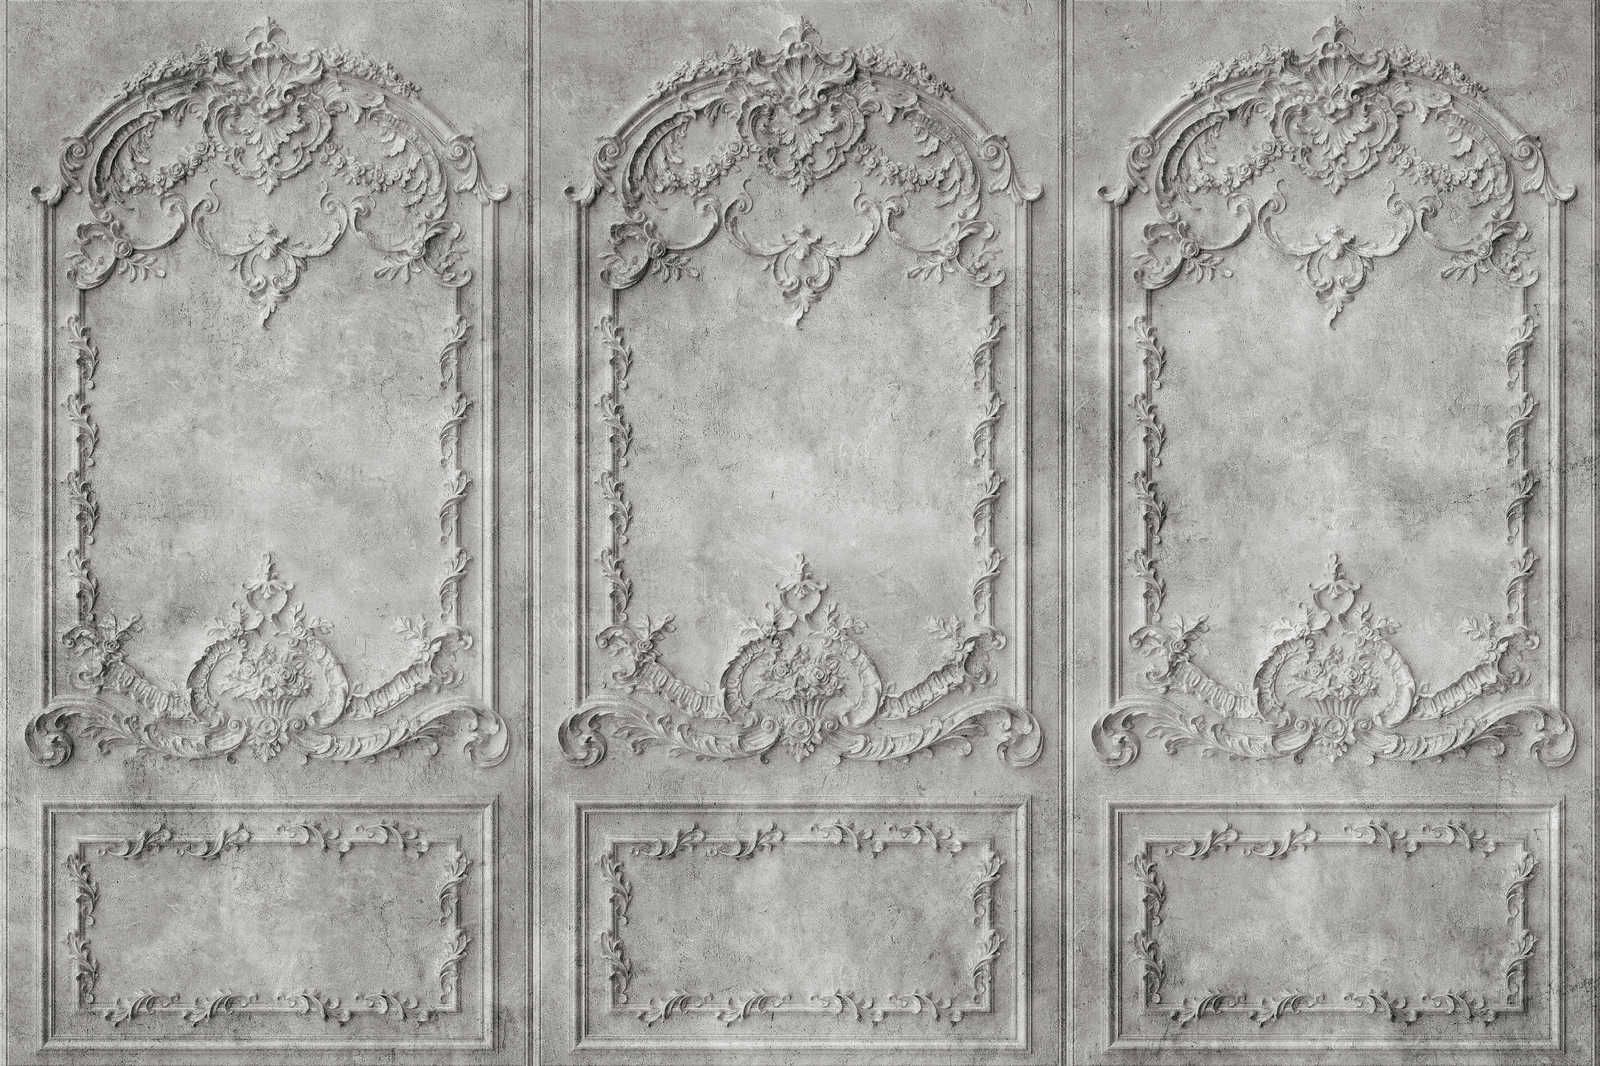             Versailles 2 - Canvas painting Wooden panels Grey in Baroque style - 0.90 m x 0.60 m
        